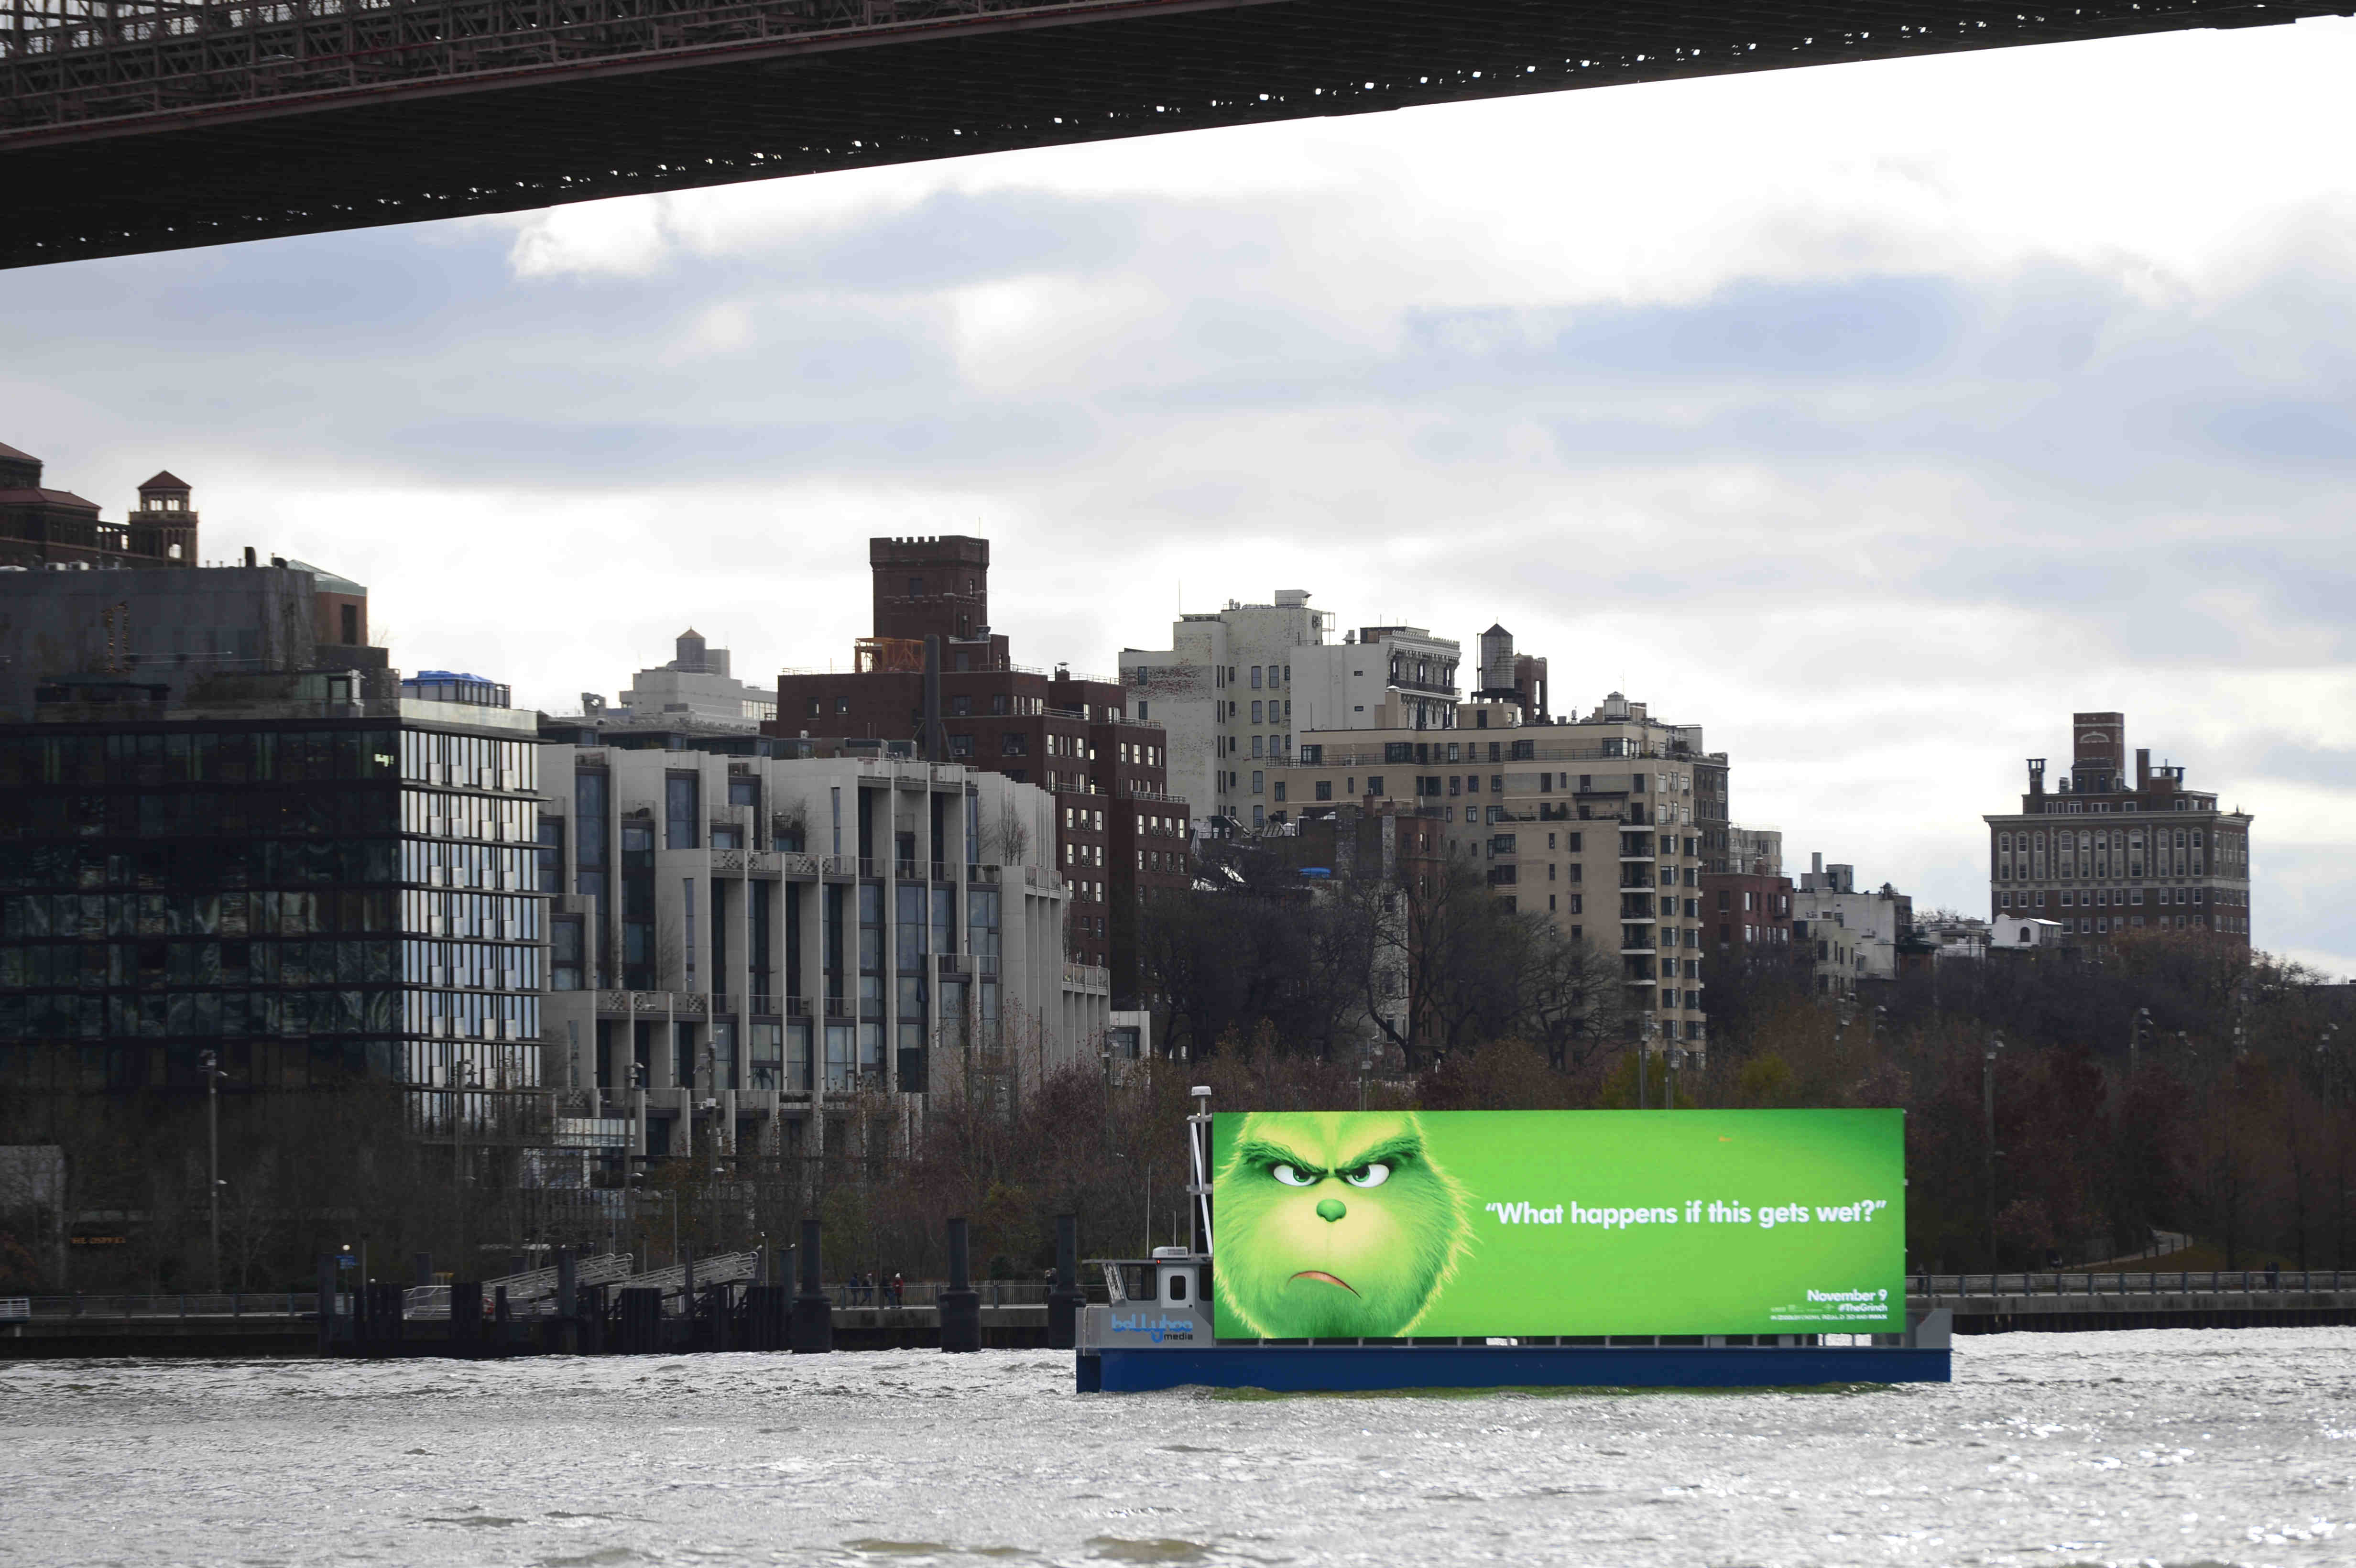 A bill passed by the State Senate would create a statewide ban on any floating digital billboards. Eagle file photo by Todd Maisel